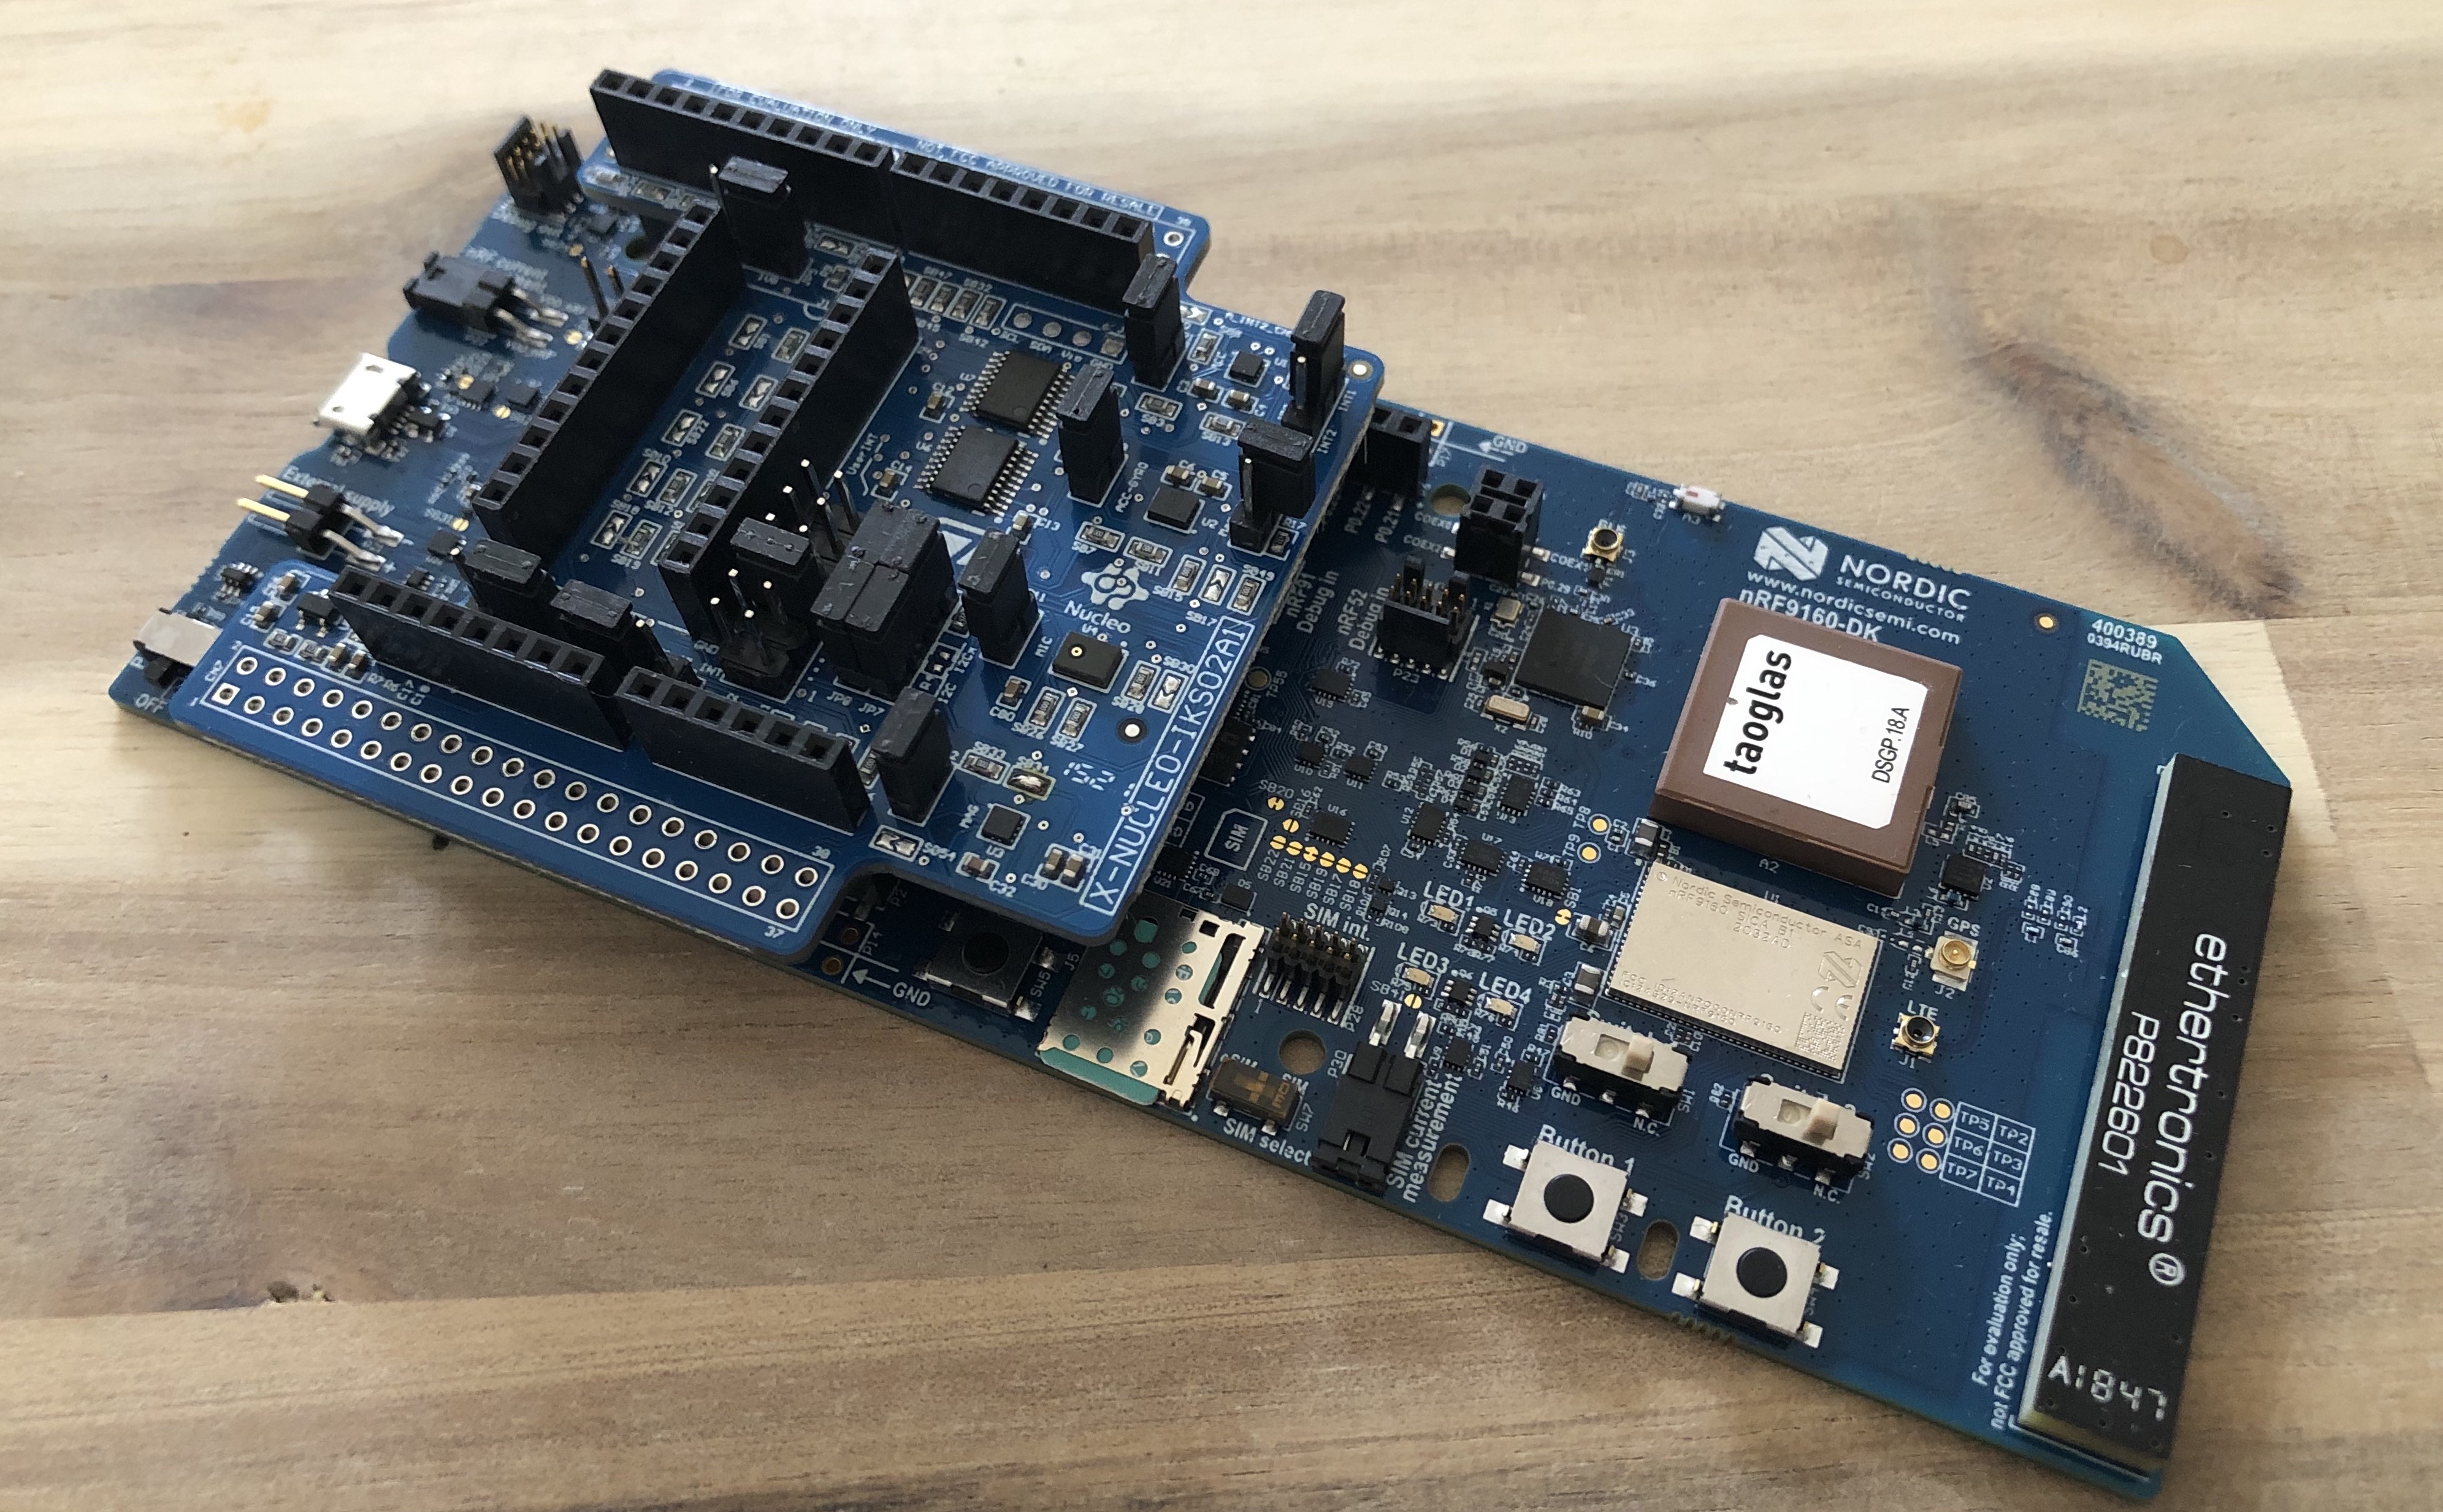 X-NUCLEO-IKS02A1 shield plugged in to the nRF9160 DK